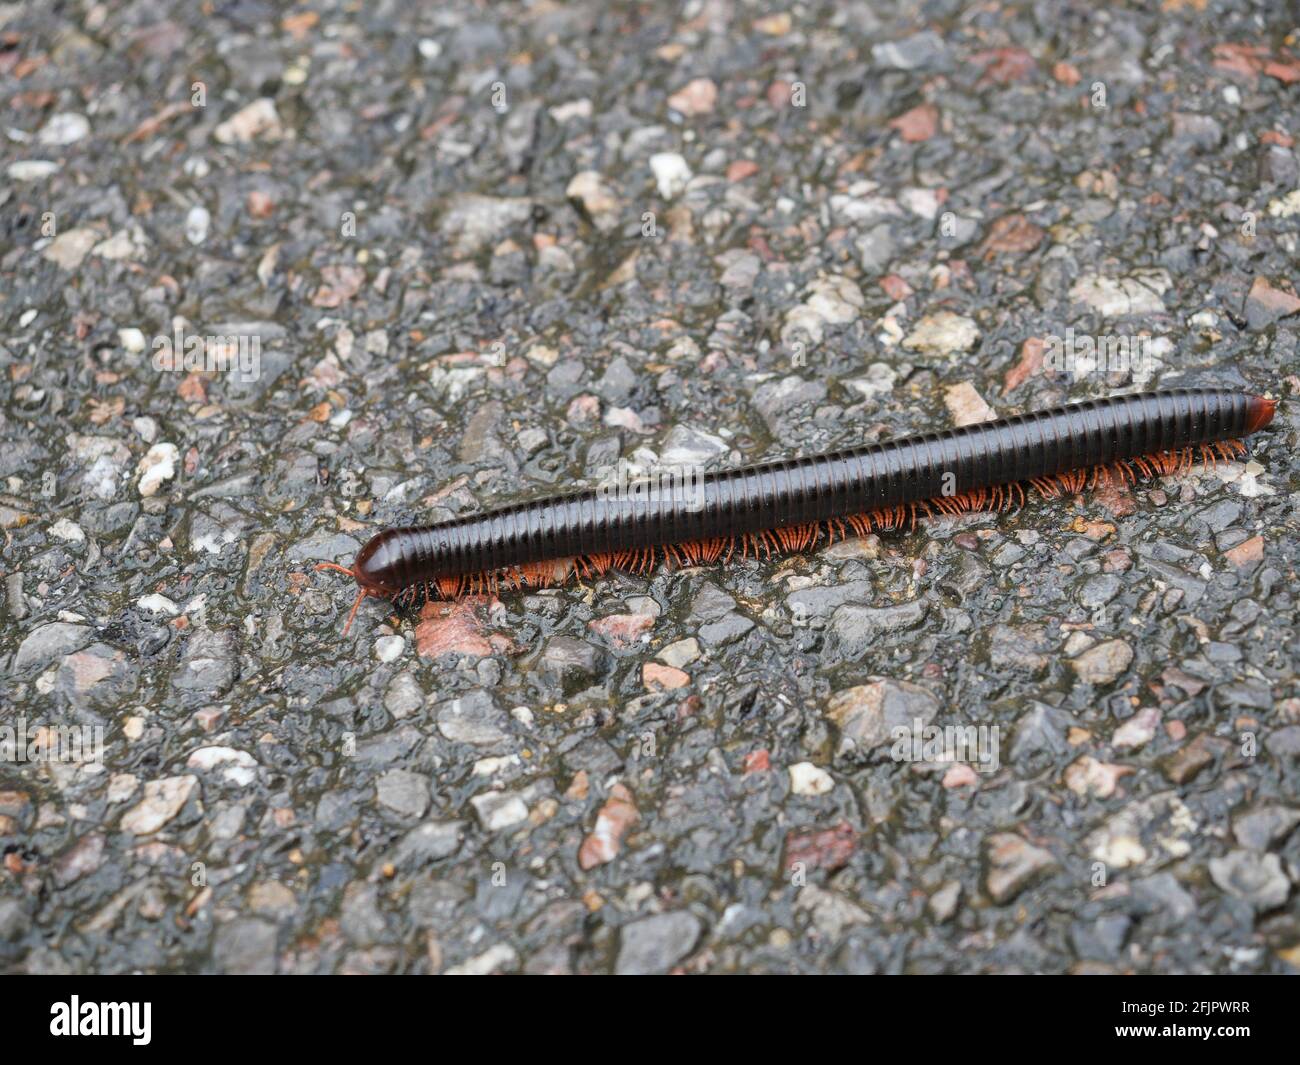 Black with red color Millipede walking on an asphalt road, Arthropod animal with that many legs Stock Photo